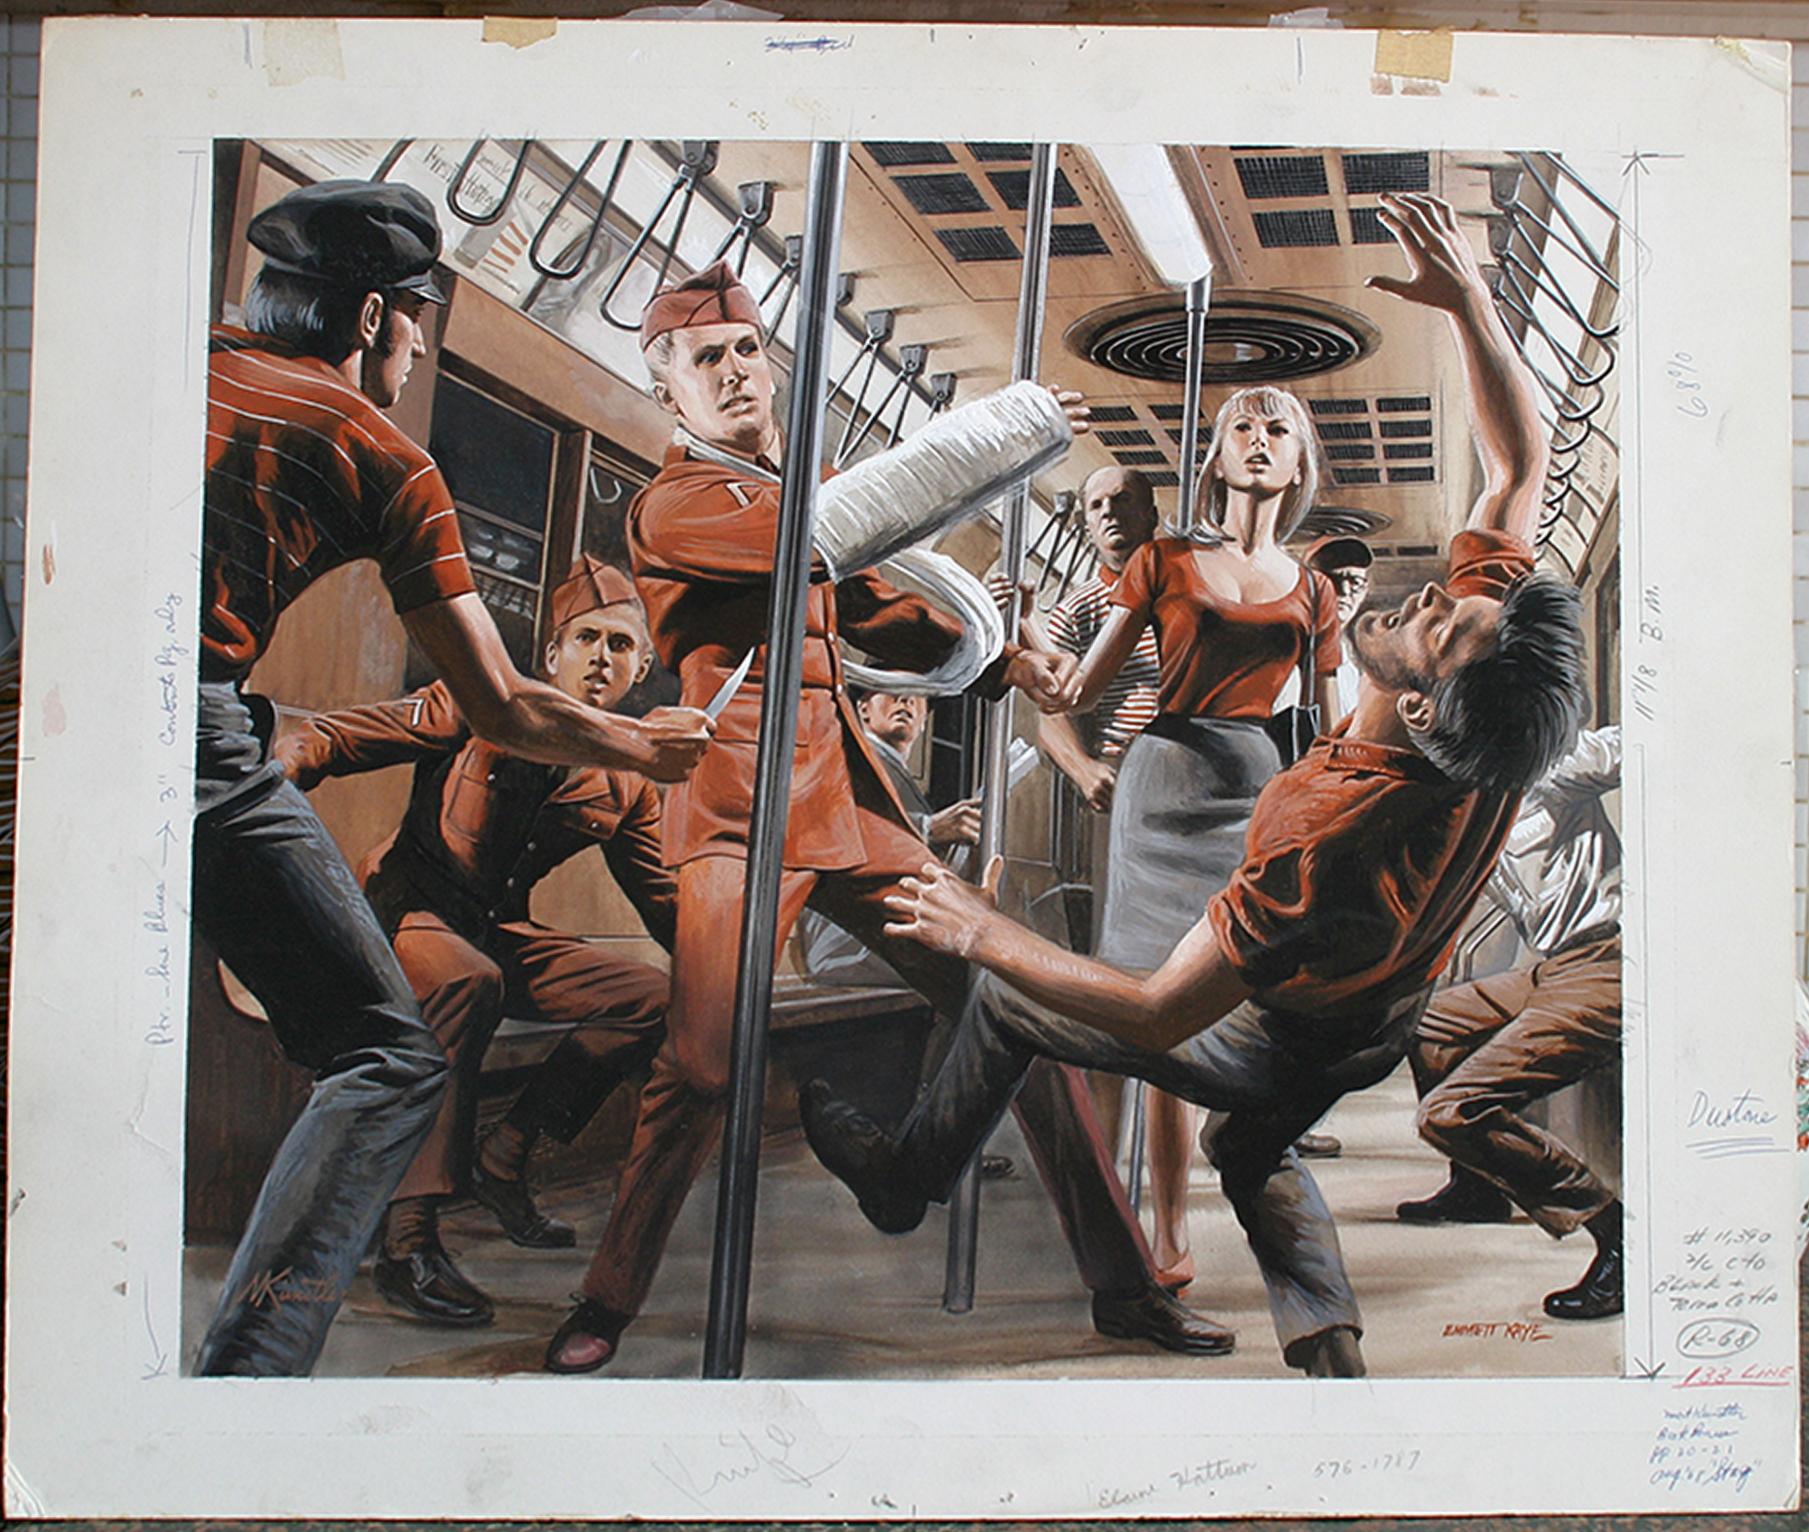 Soldier Beats Up Muggers on Subway - Stag Magazine story illustration - Painting by Mort Künstler